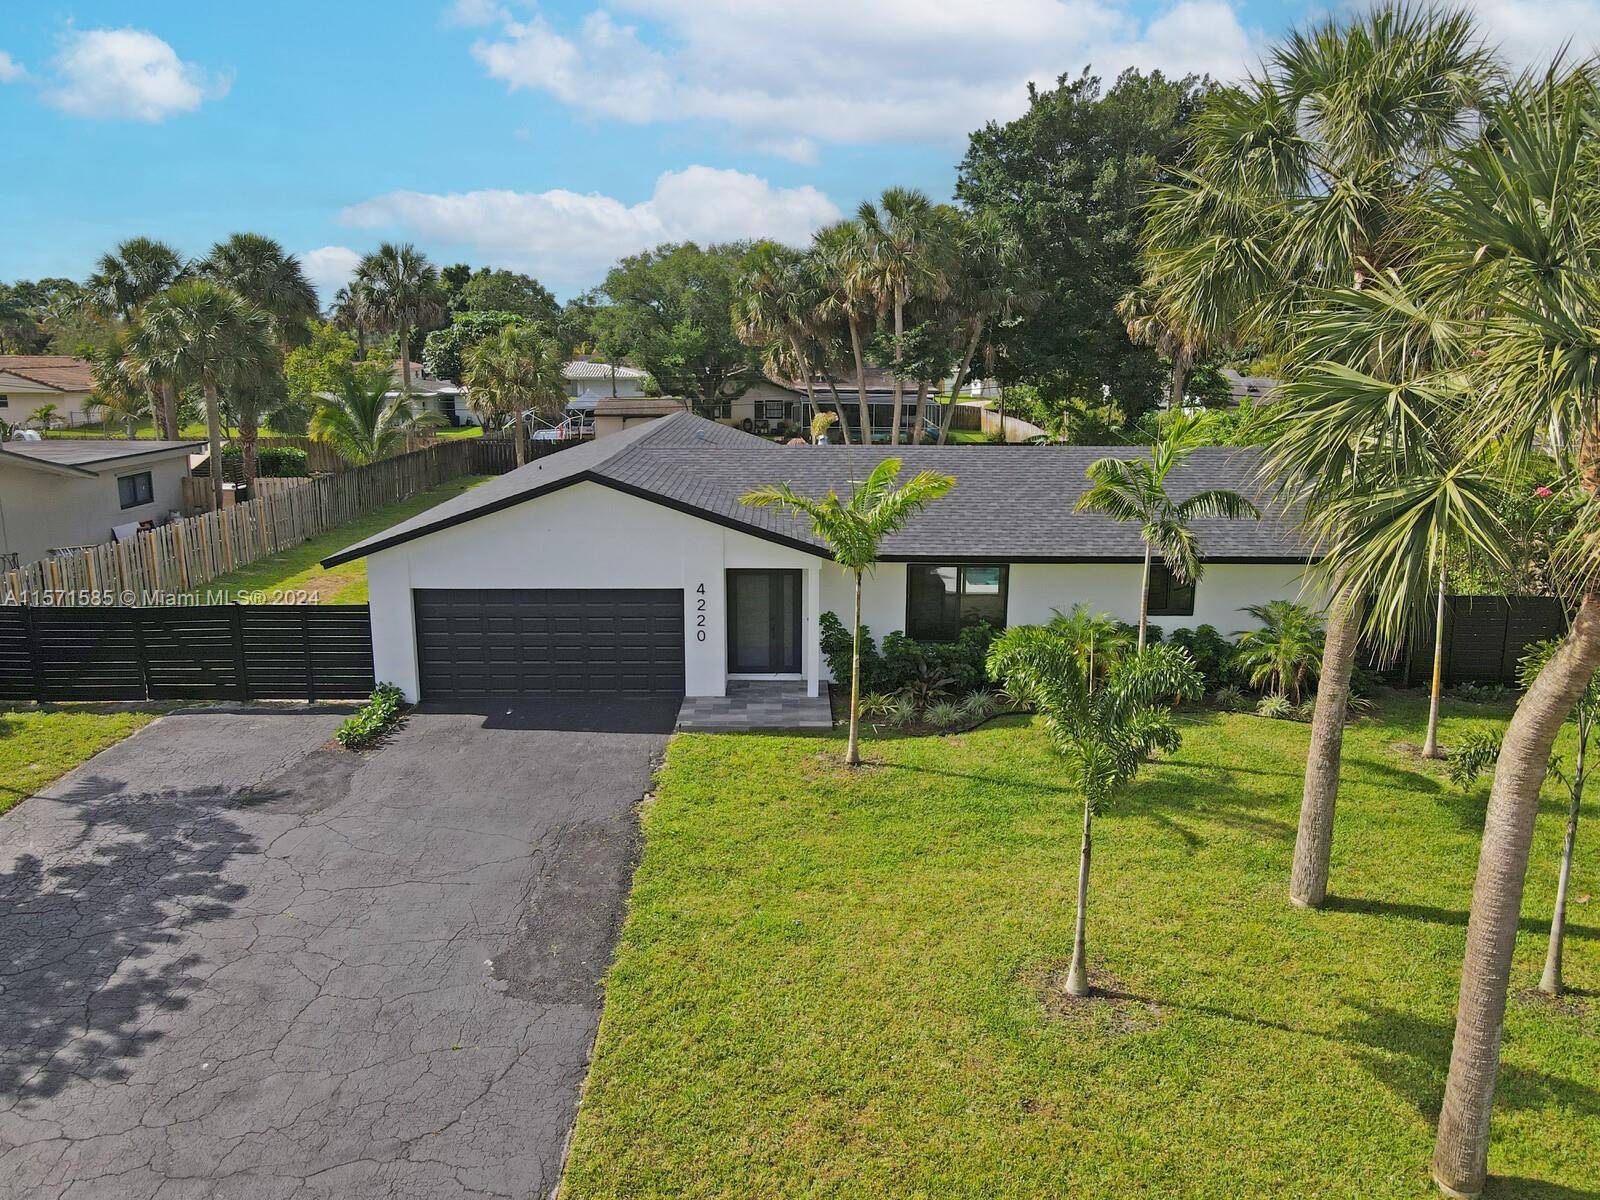 One Story Pool Home, in Plantation Country Club Estates, 4 Bedroom 2 Bathroom Den Office Space, 2 Car Garage and Pool Wood Fenced Private Backyard Newly Resurfaced Pool and New ...